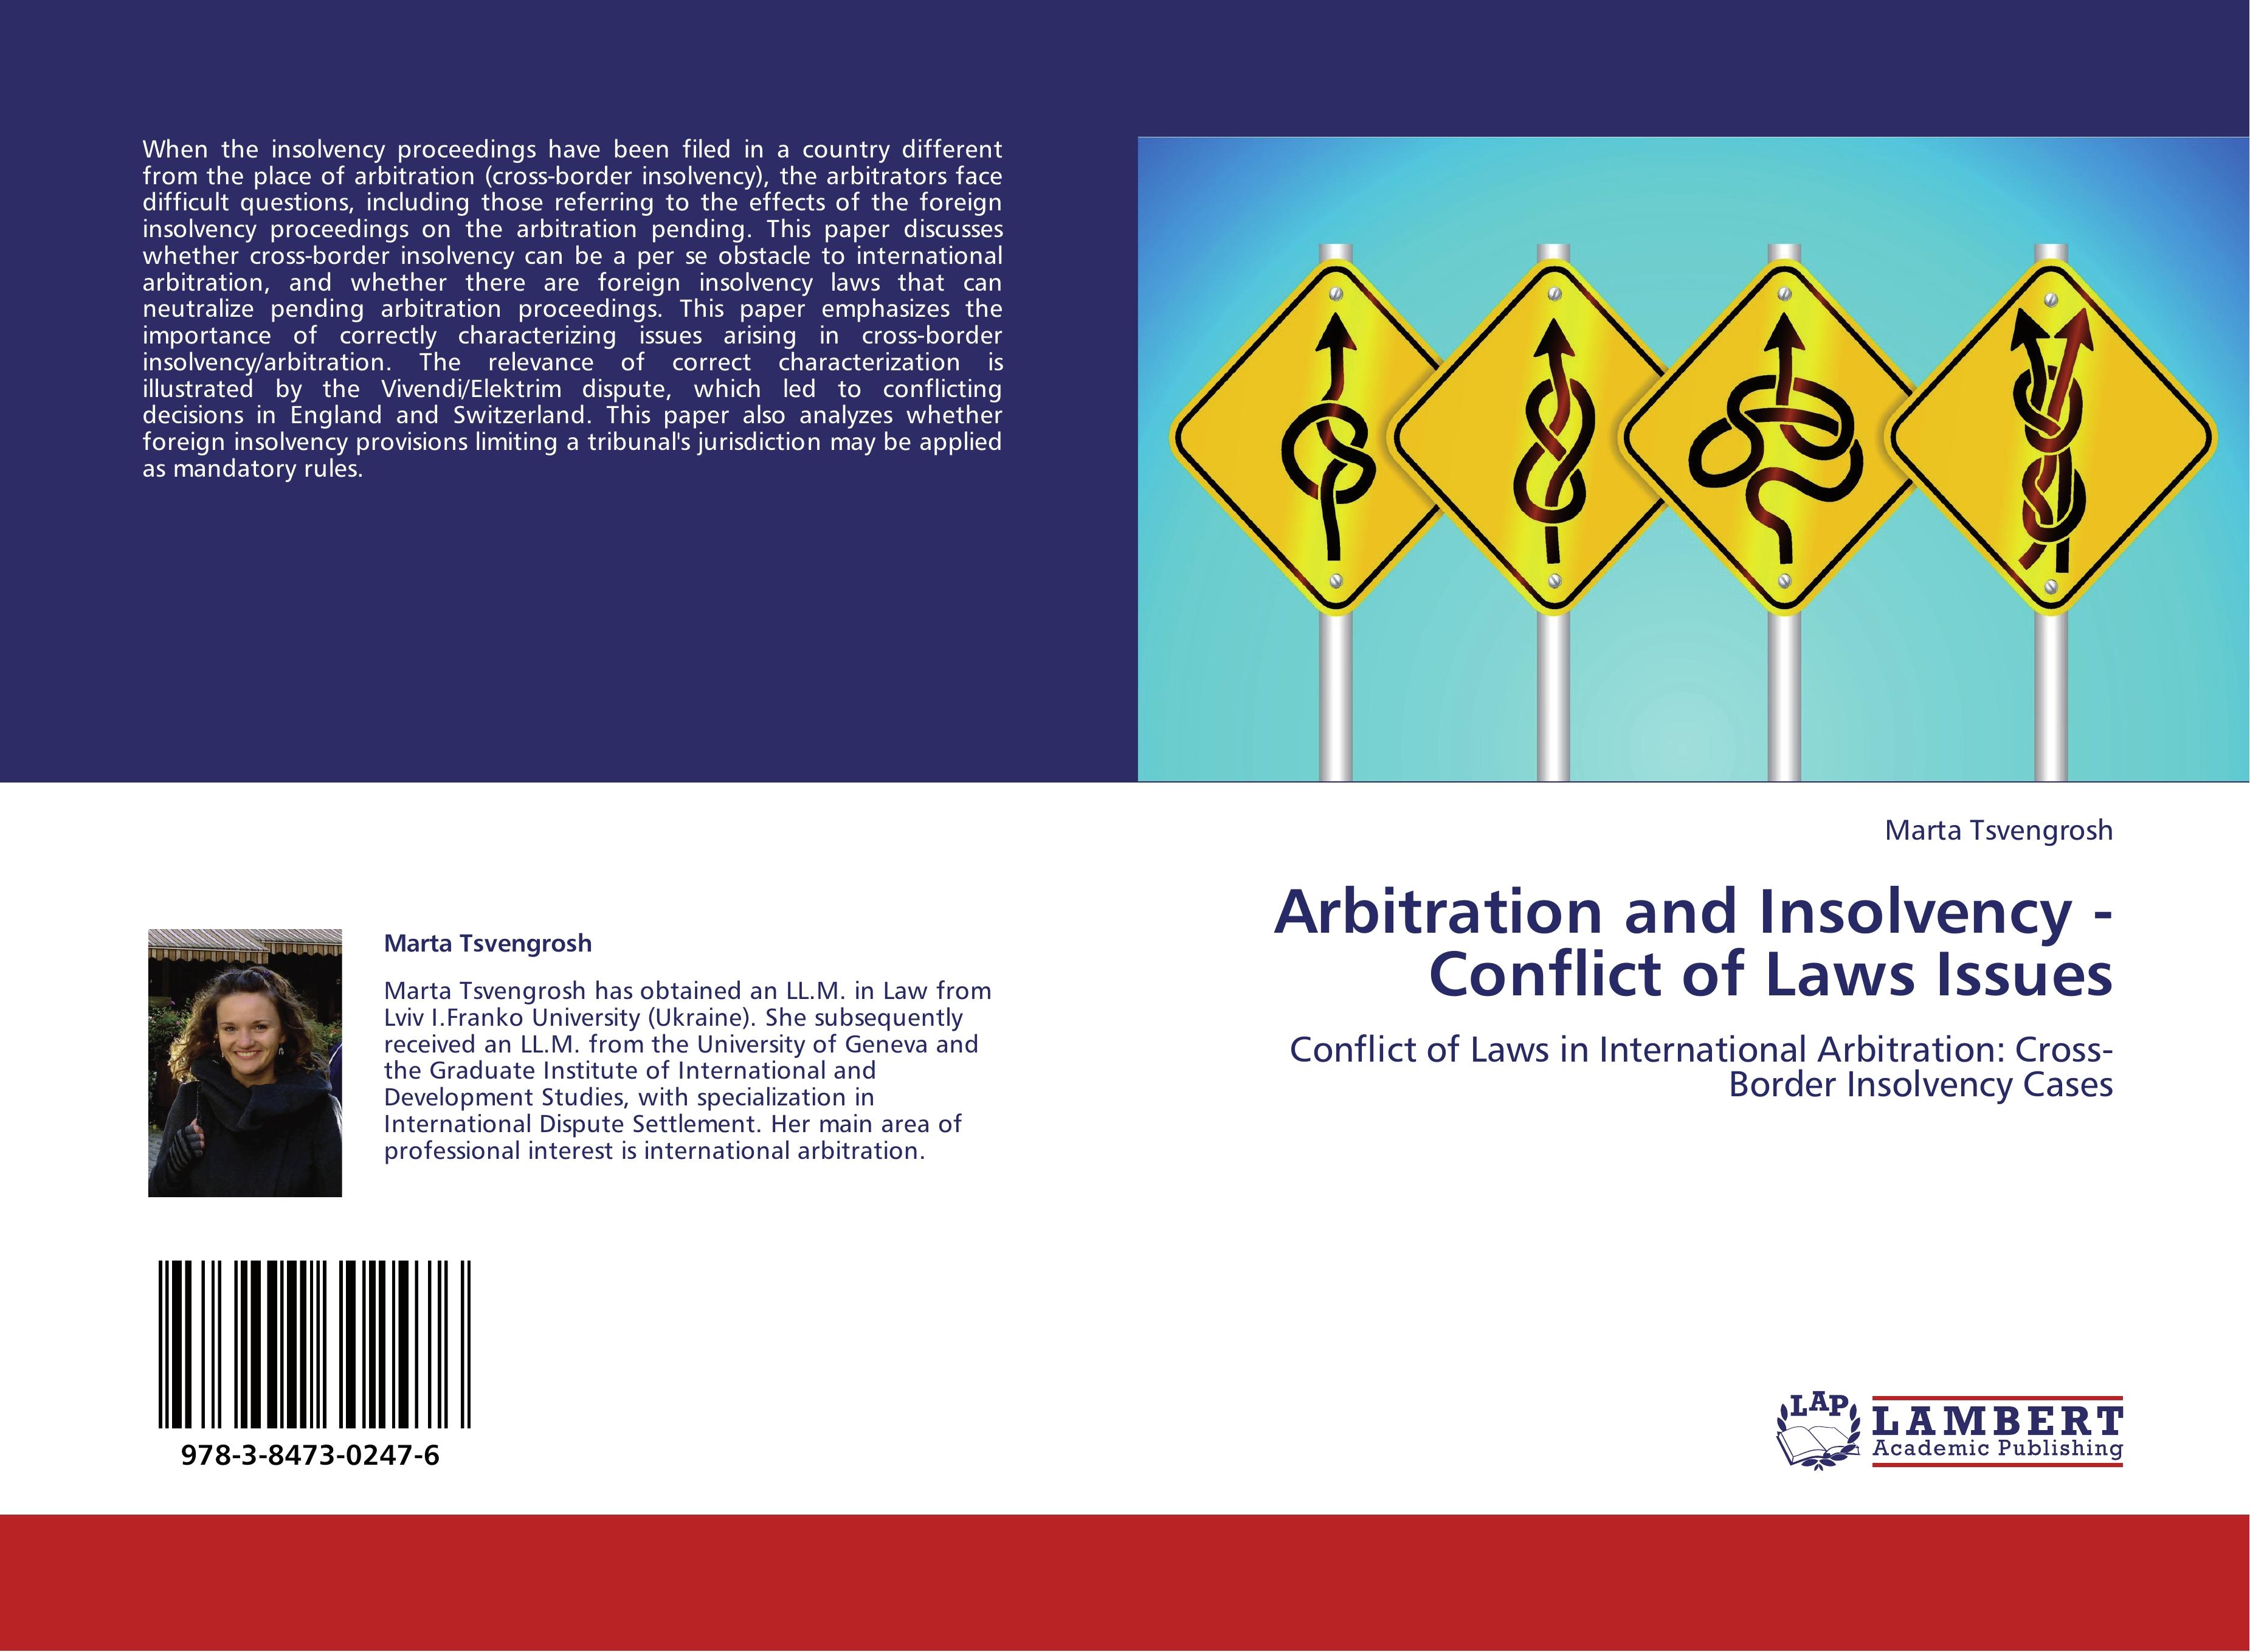 Arbitration and Insolvency - Conflict of Laws Issues - Marta Tsvengrosh